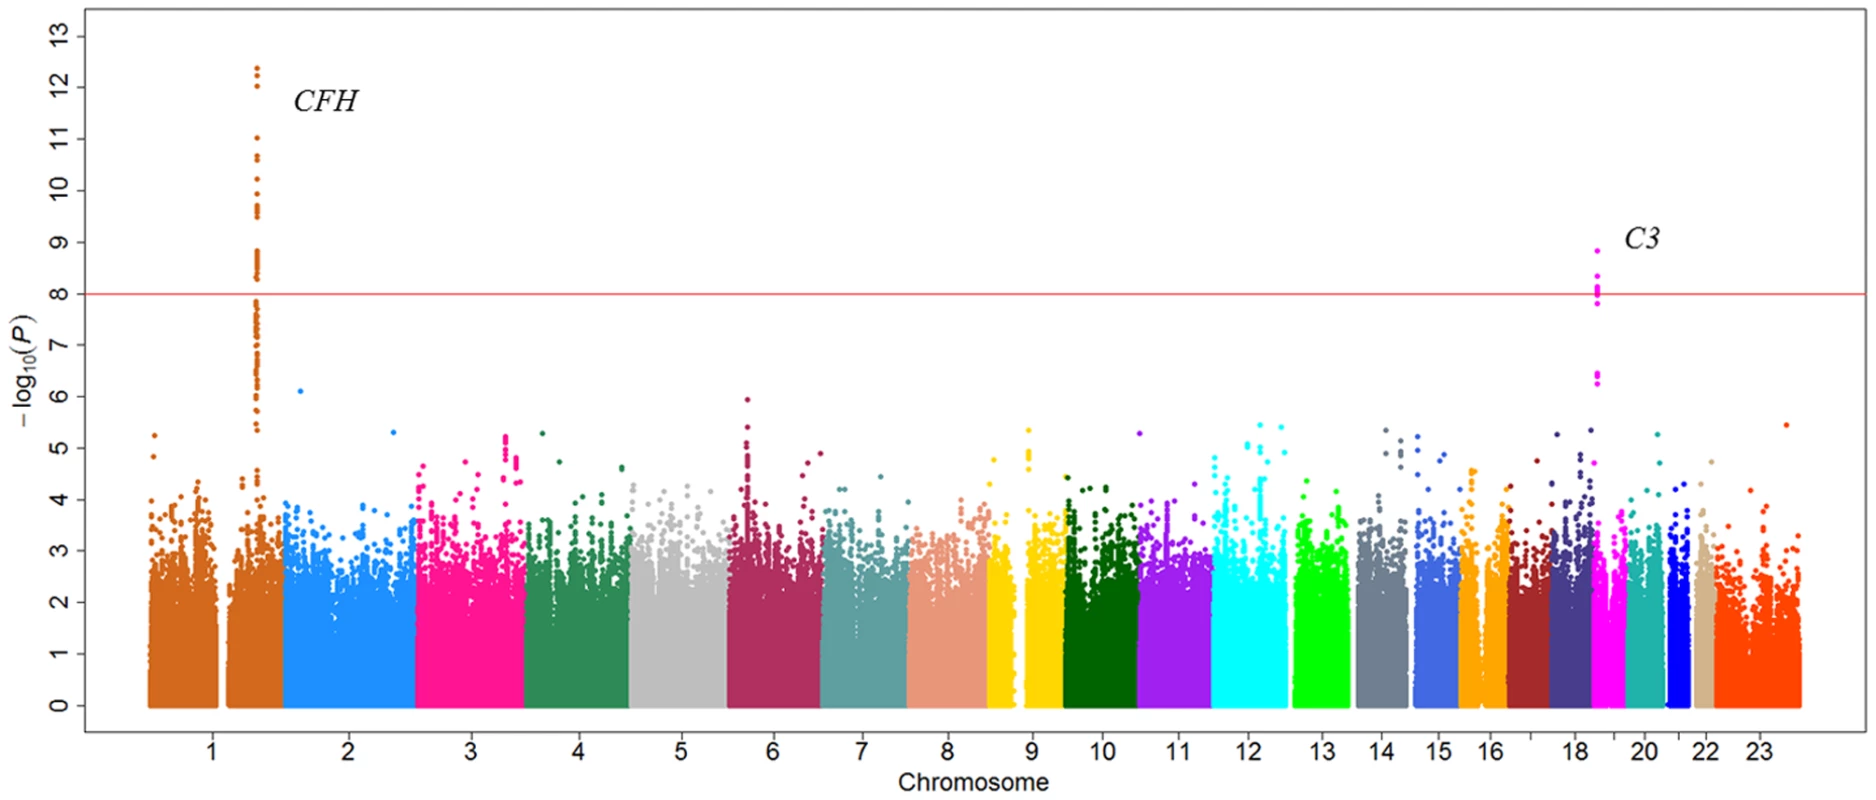 Manhattan plot of genome-wide association analyses for C3 level.